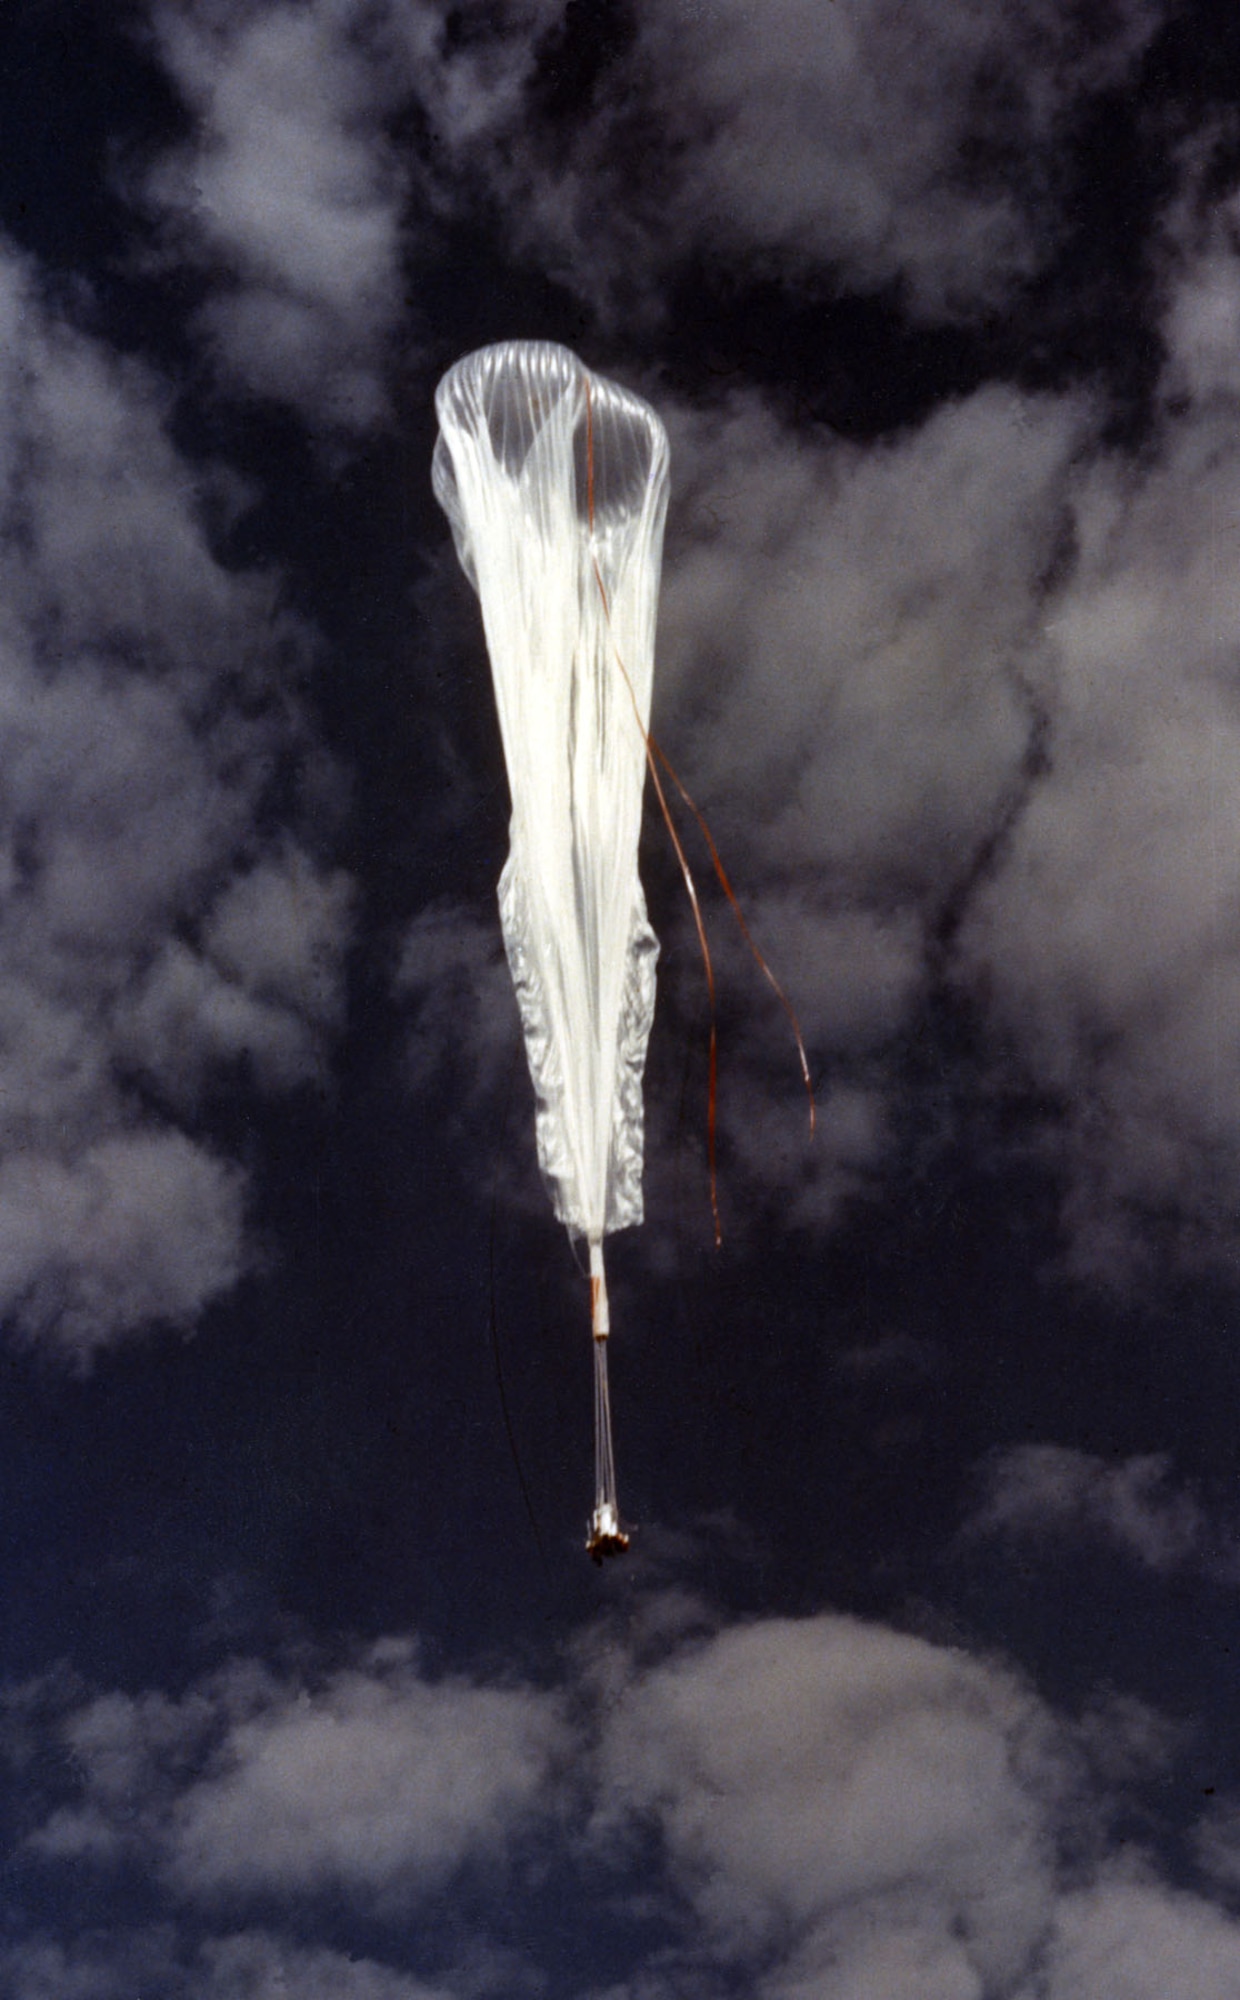 The balloon and gondola carrying Maj. Simons photographed just seconds after its launch. As the balloon climbed, the outside air pressure decreased, and the gas within the balloon expanded to fill the envelope. (U.S. Air Force photo)